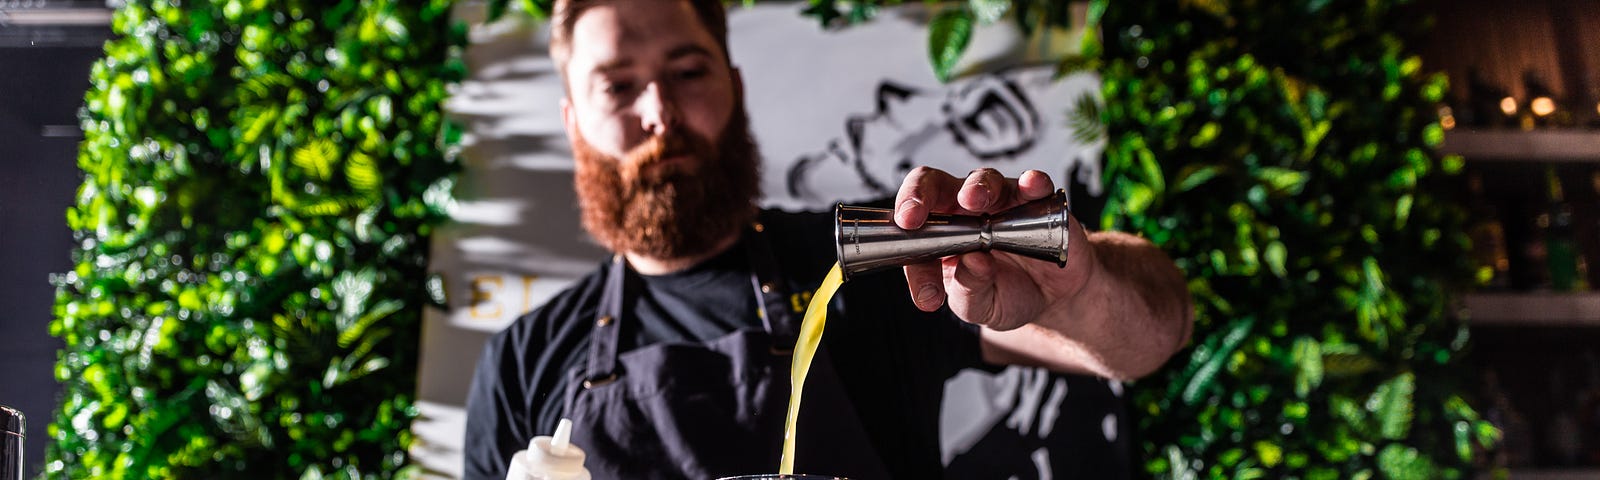 Image of a bartender pouring a drink from a cocktail shaker